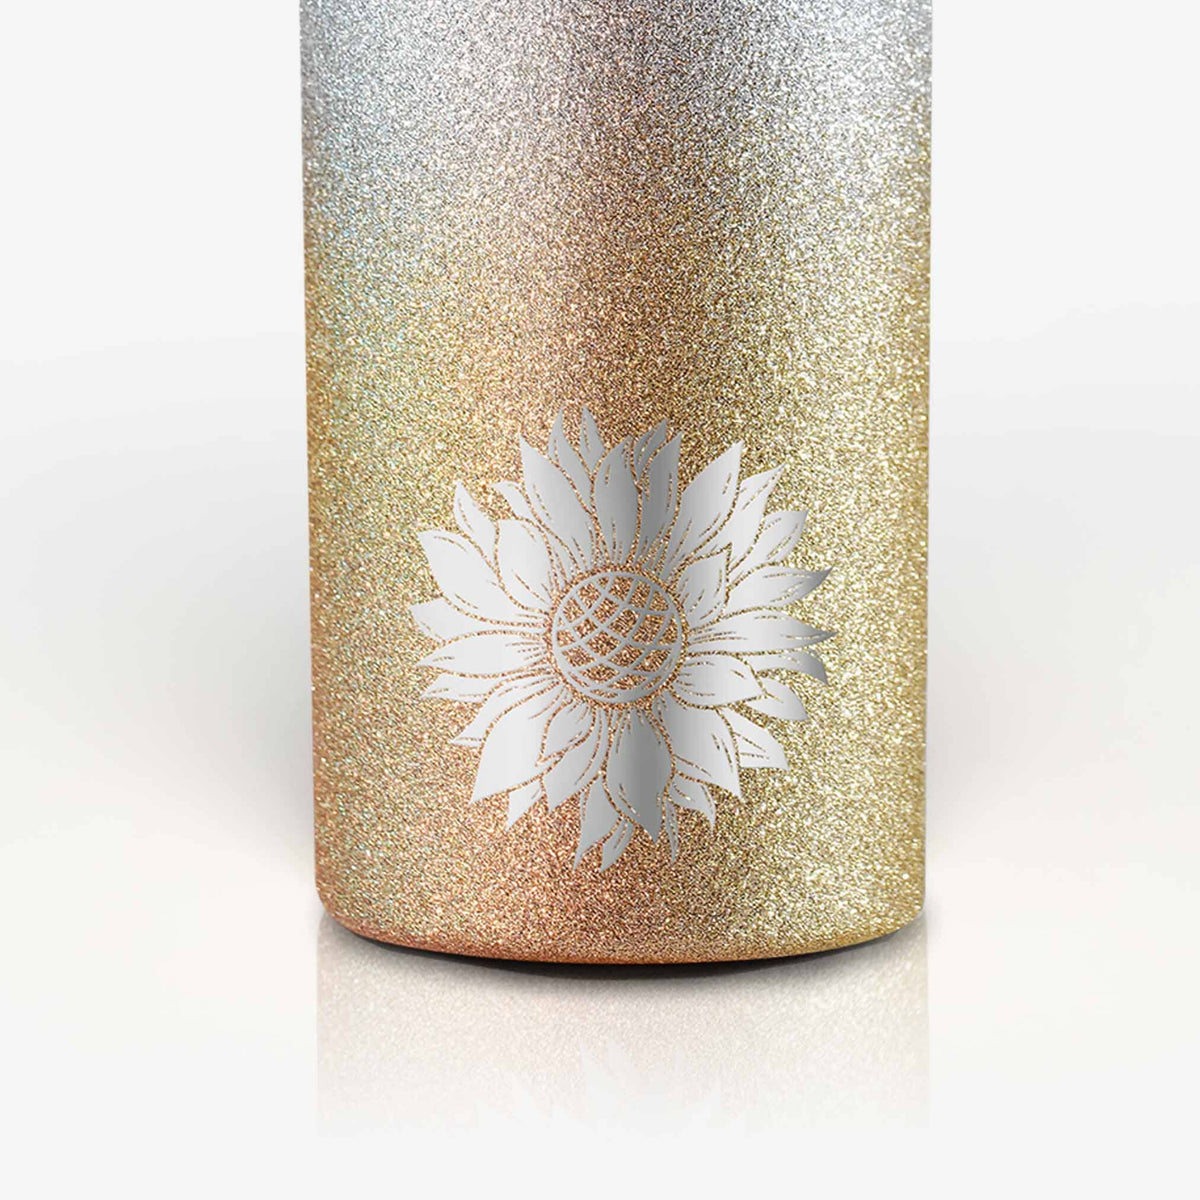 Onebttl Gifts for Crafters, Crafting Gifts for Women - Tumbler for  Crafters, Female, Her - I'd Rather Be Crafting - 20oz/590ml Stainless Steel